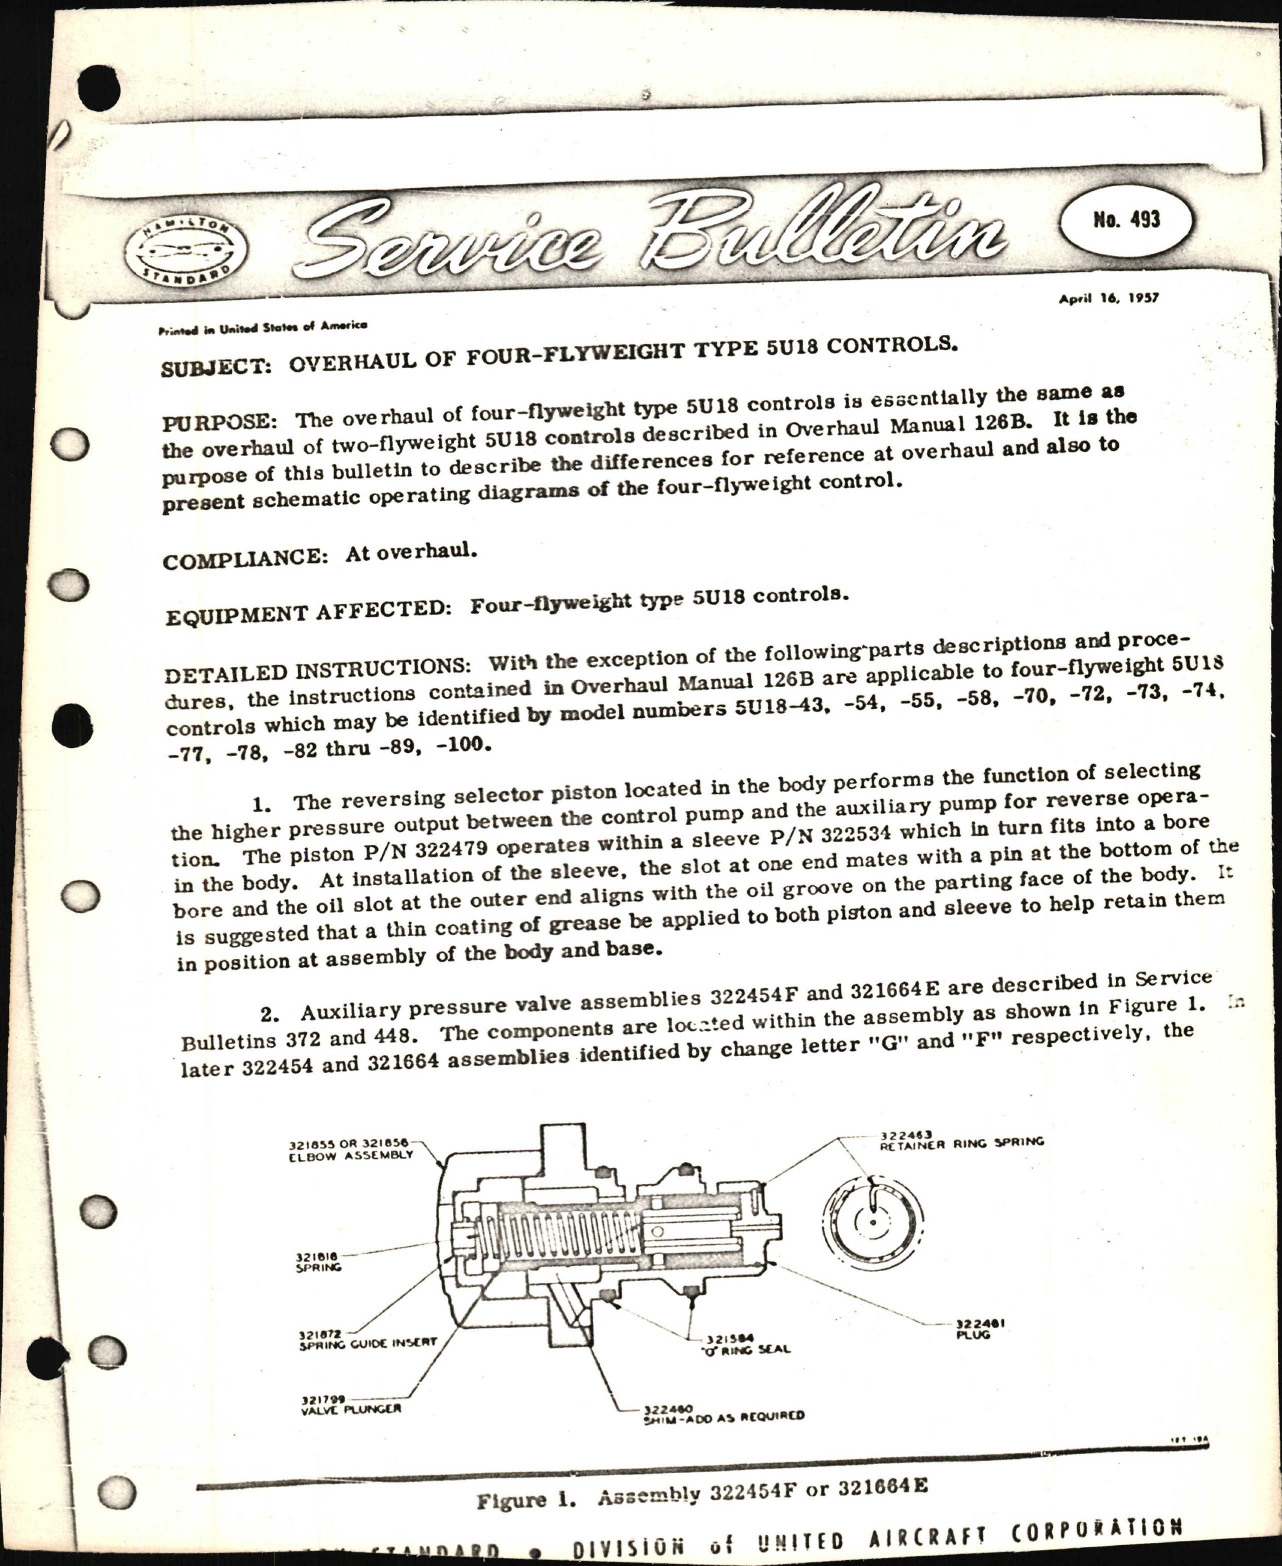 Sample page 1 from AirCorps Library document: Overhaul of Four-Flyweight Type 5U18 Controls